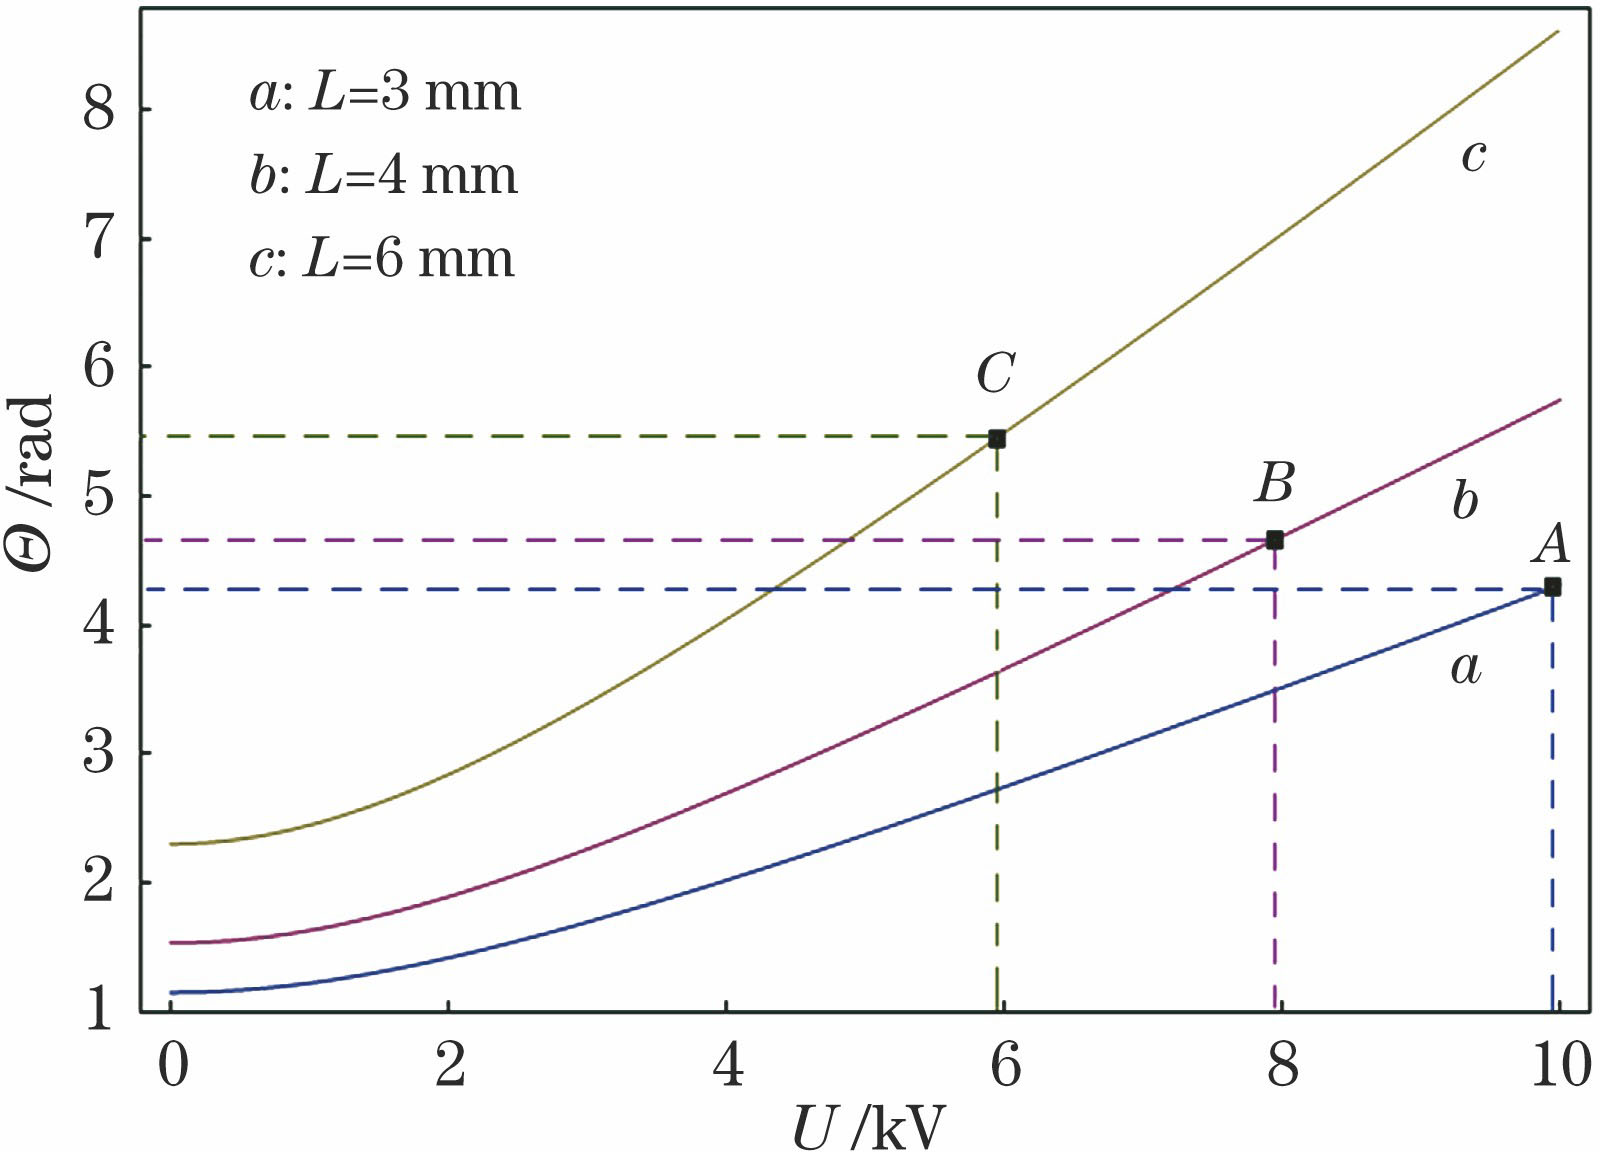 Curves of phase retardation angle Θ induced by elliptical birefringence in BSO20 crystal versus applied voltage U